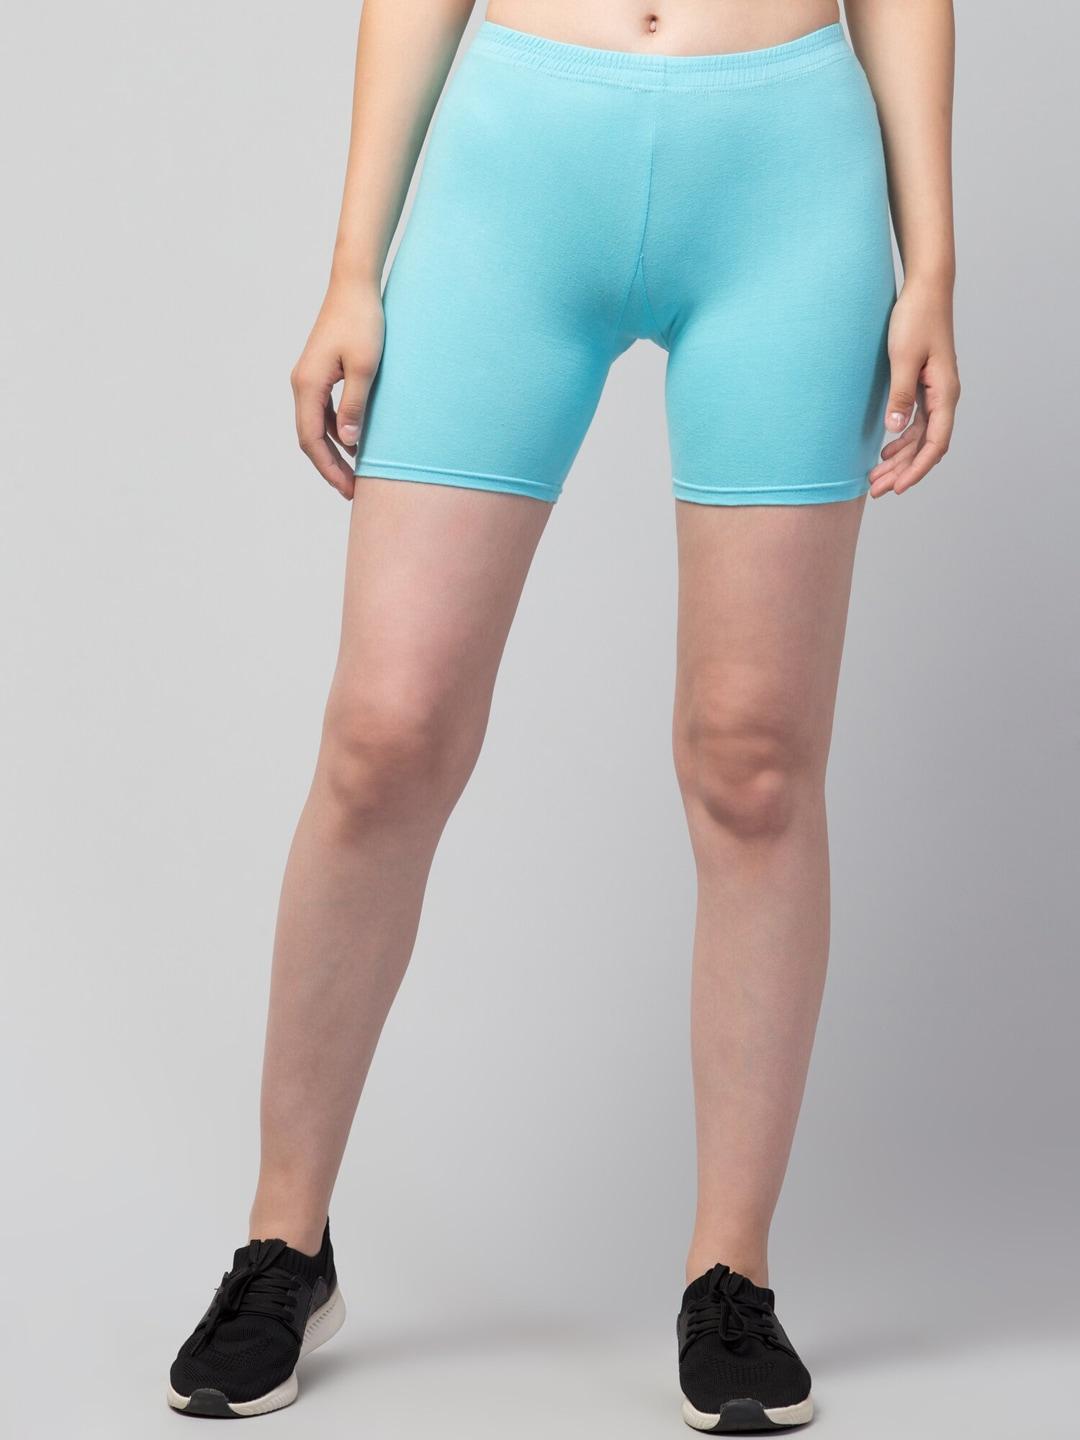 apraa & parma women turquoise blue solid cotton skinny fit cycling sports shorts